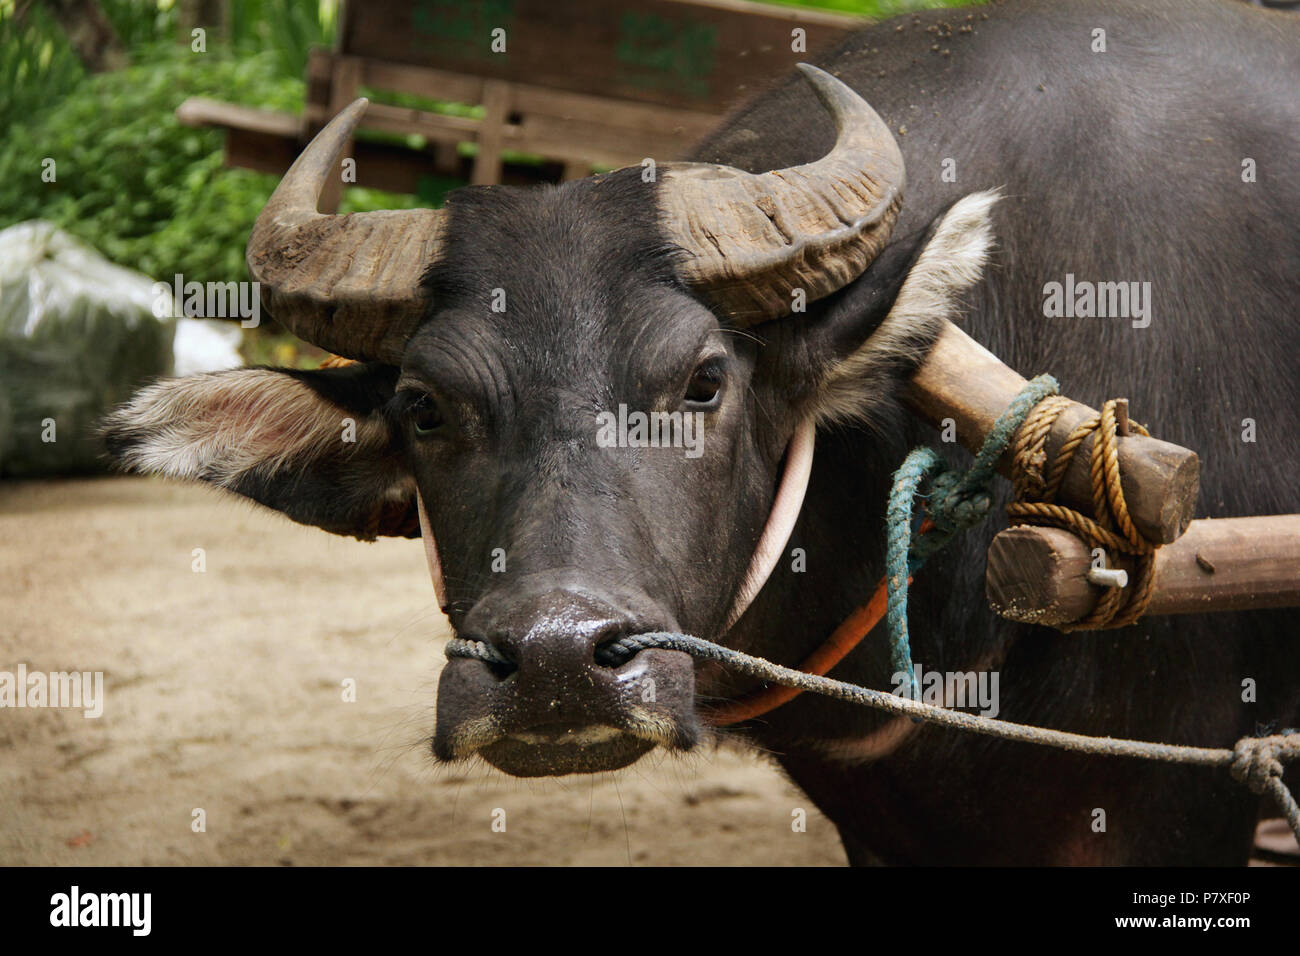 Closeup portrait of Philippine water buffalo looking at camera. It has a yoke attached to it. Stock Photo